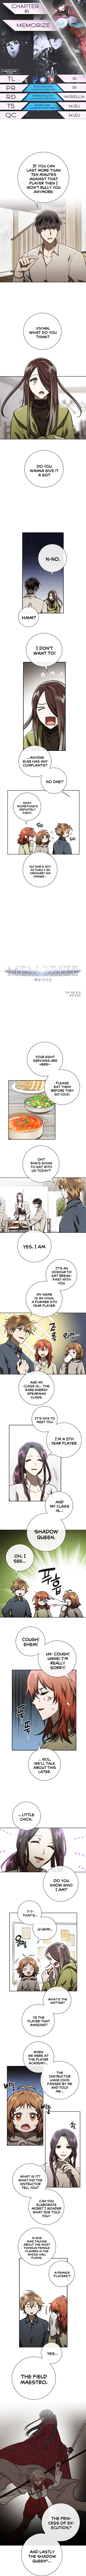 Memorize - Chapter 14307 - Image 1